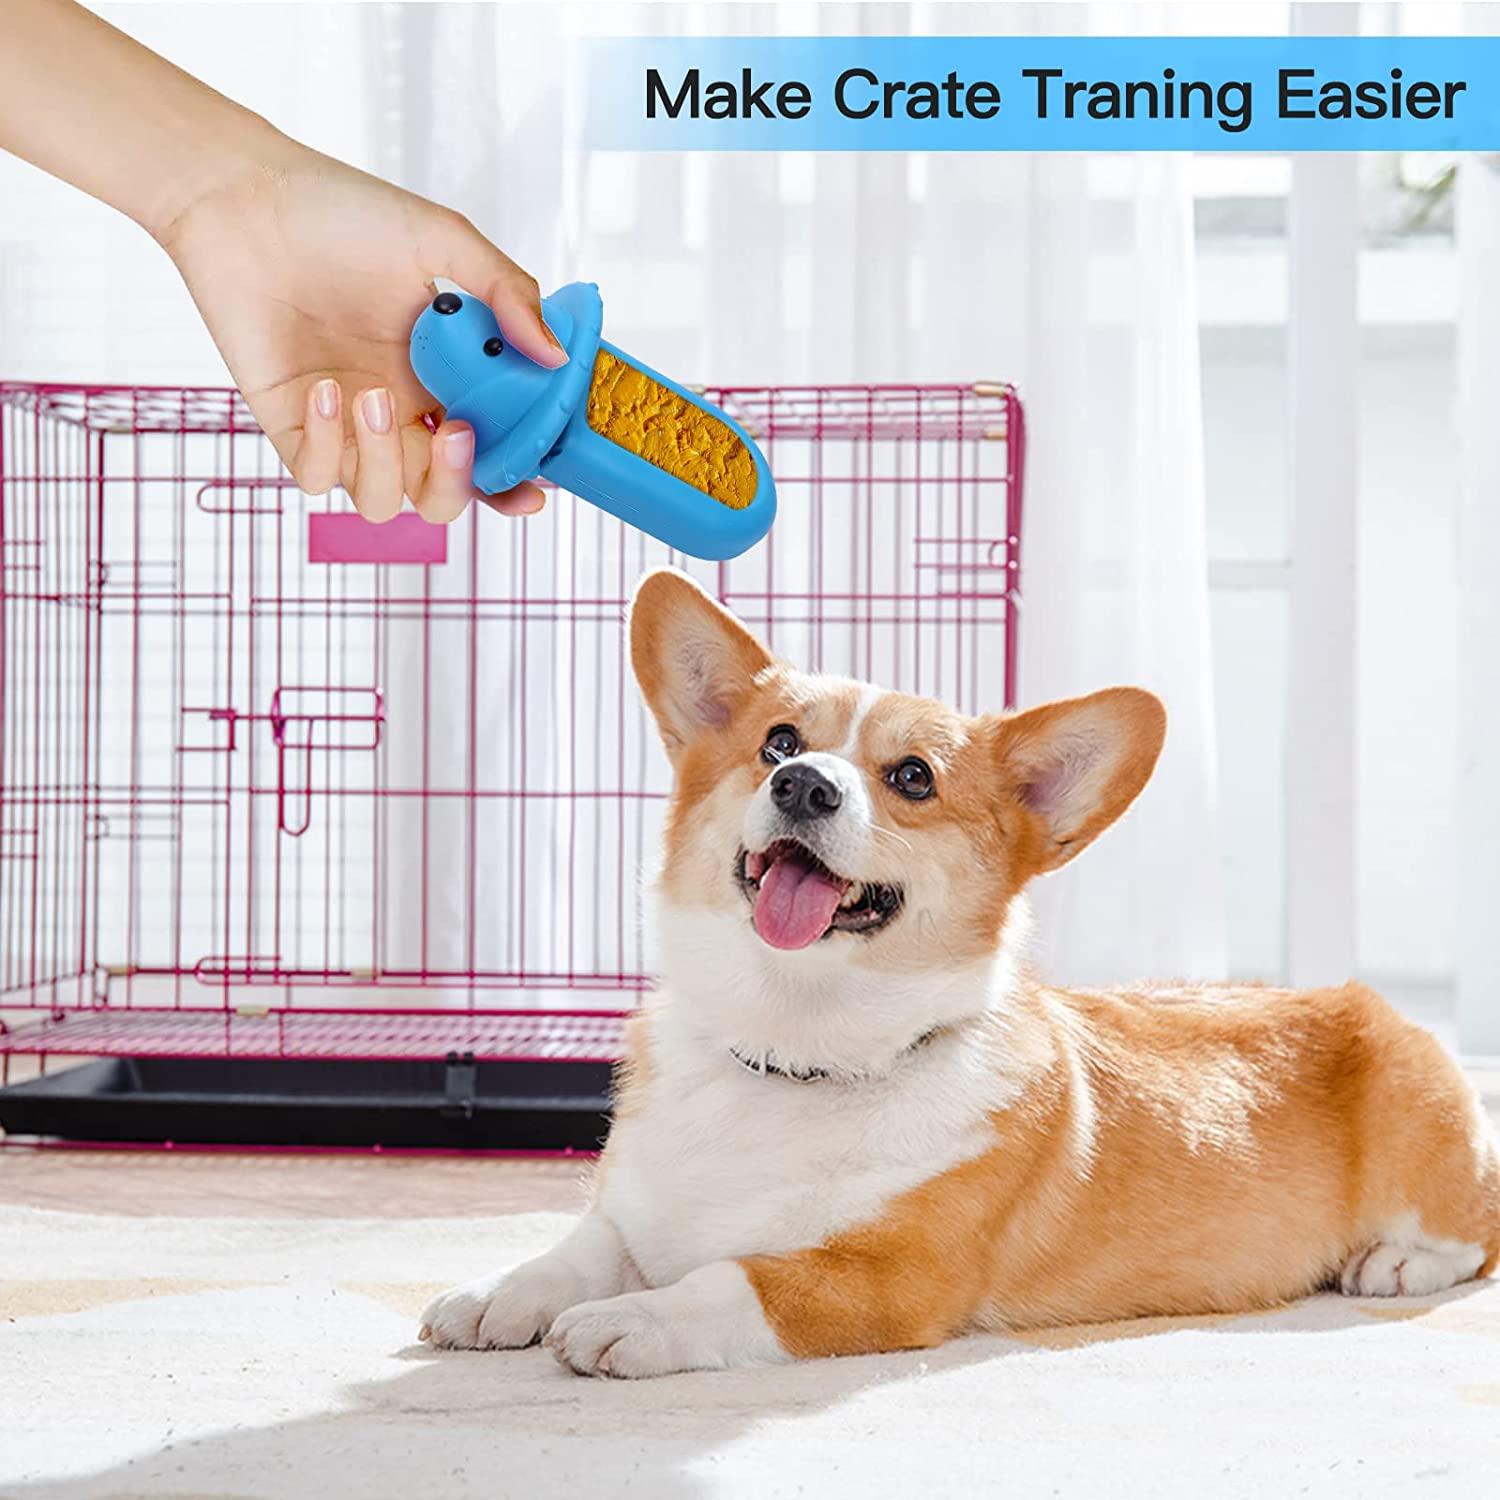 Dog Training Chew Toys/Crate Toys for Dogs,Dog Training Aid for Reduces  Anxiety/Barking,Dog Peanut Butter Licking Toy,Puppy Training/Teething  Cleaning